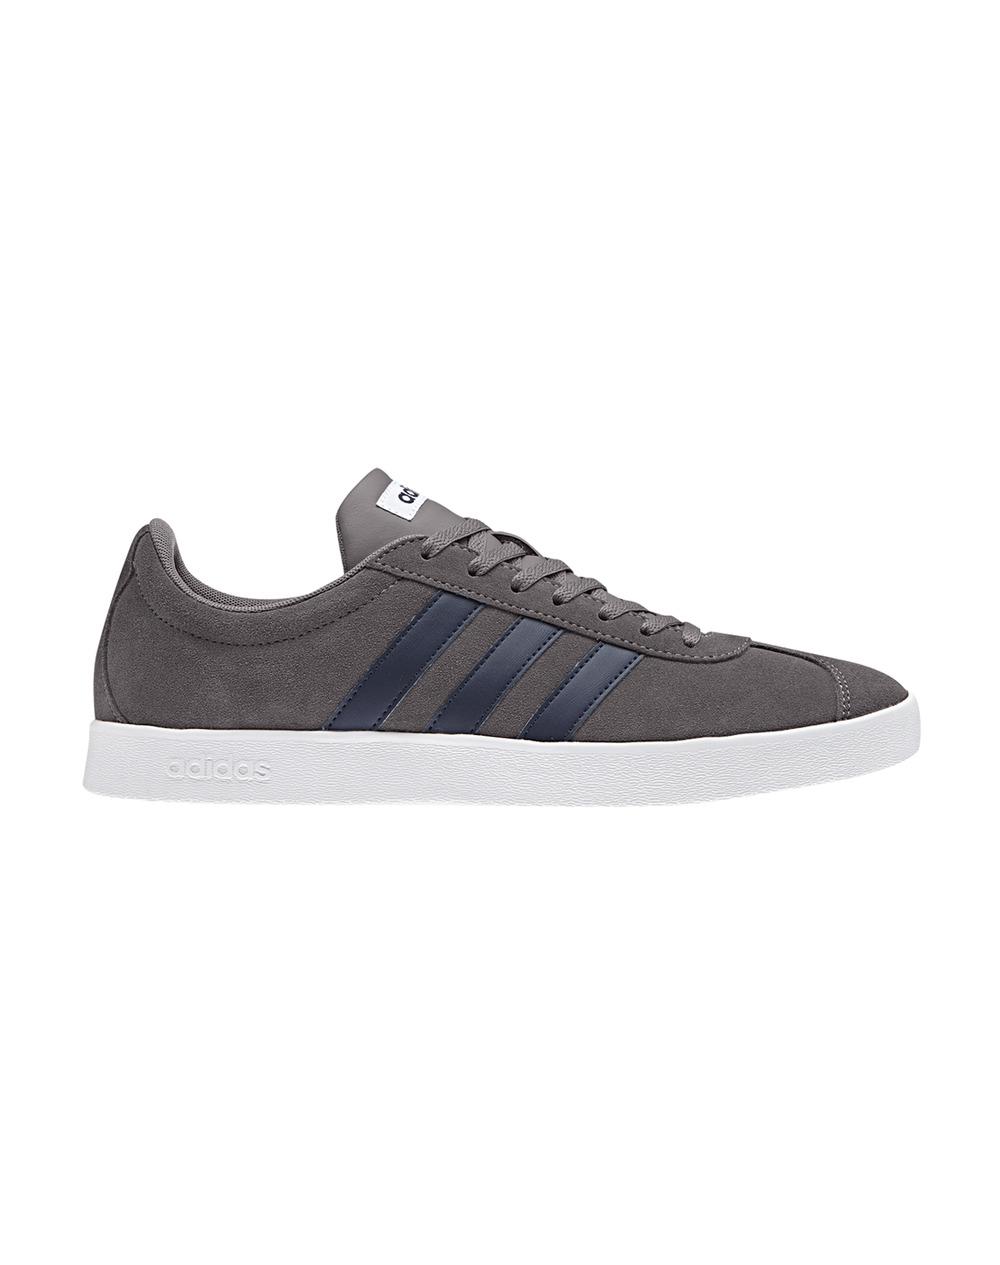 Adidas Neo El Corte Ingles Clearance Sale, UP TO 53% OFF |  www.realliganaval.com